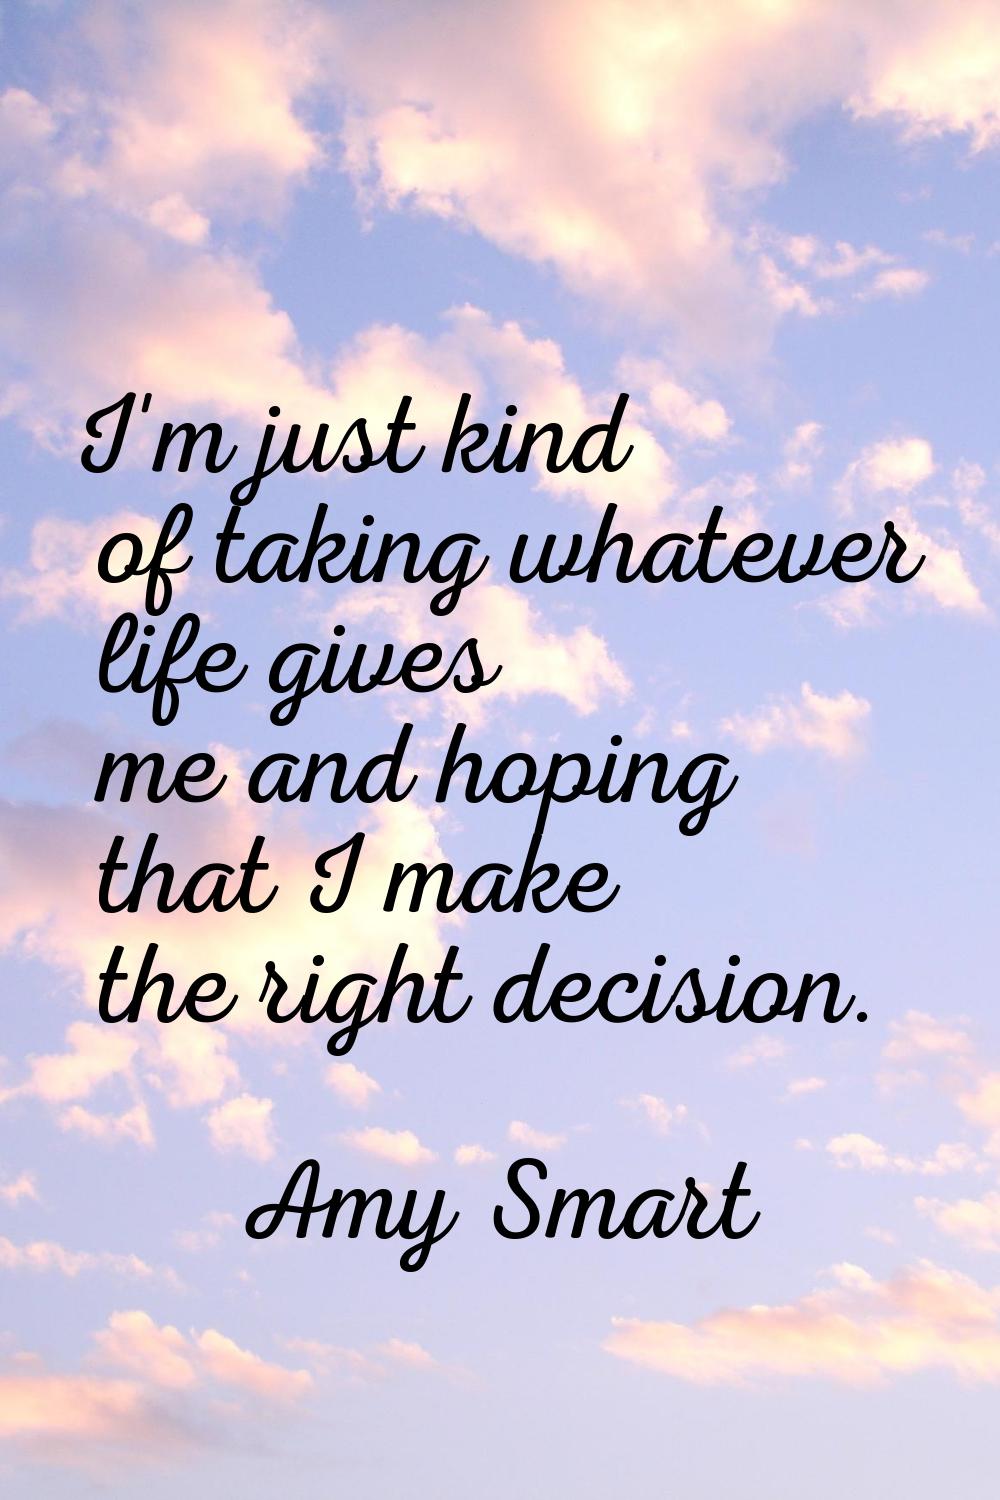 I'm just kind of taking whatever life gives me and hoping that I make the right decision.